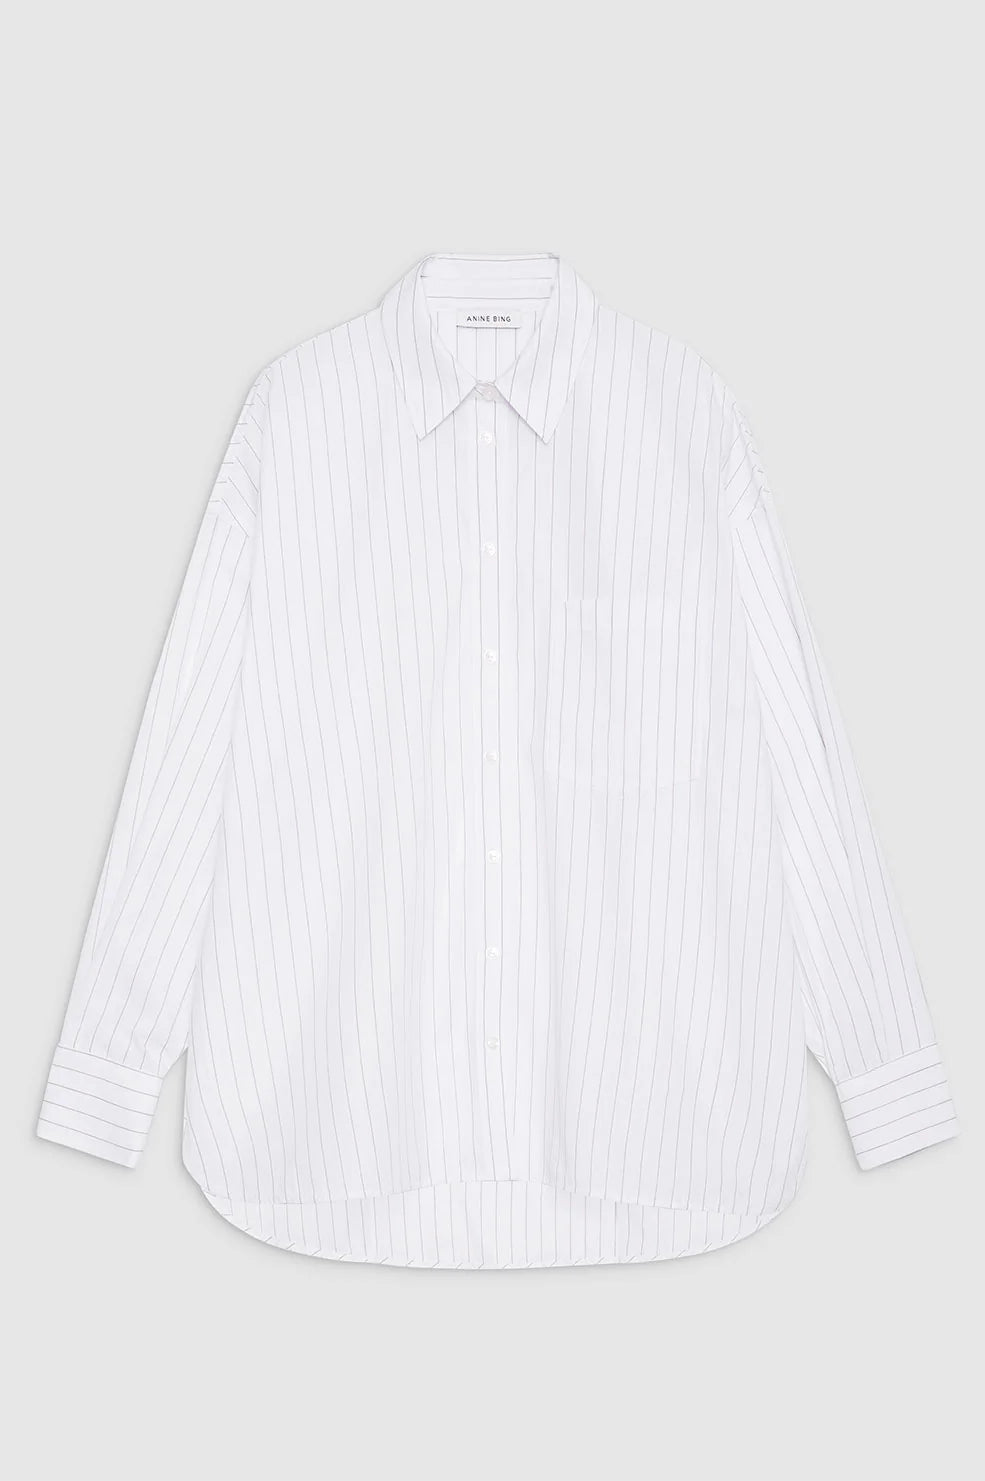 ANINE BING - CHRISSY SHIRT - WHITE AND TAUPE STRIPE